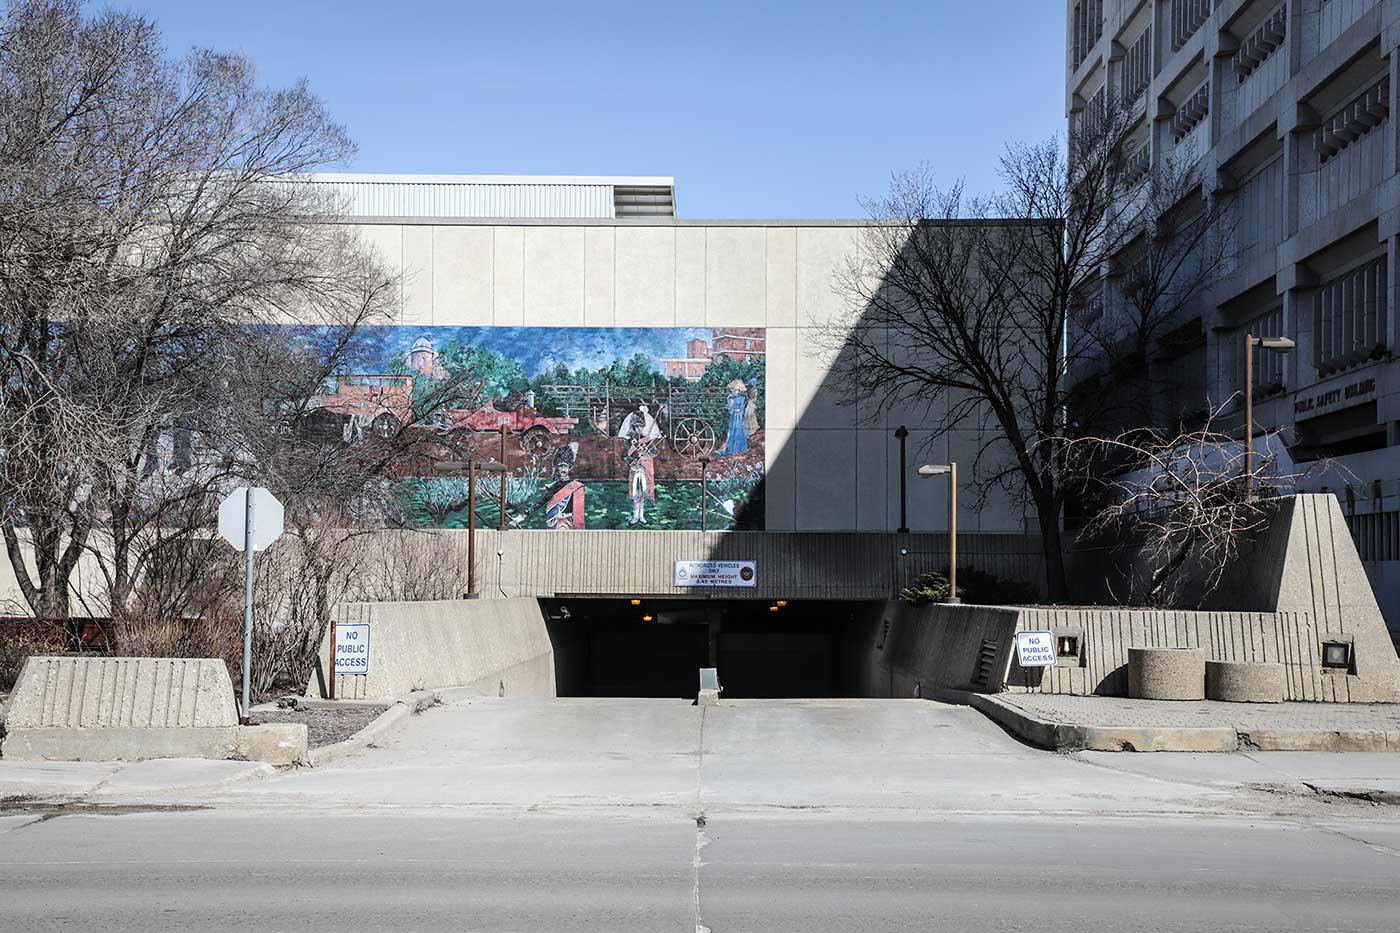 A mural decorates the wall above the entrance to the Public Safety Building's underground parking space.